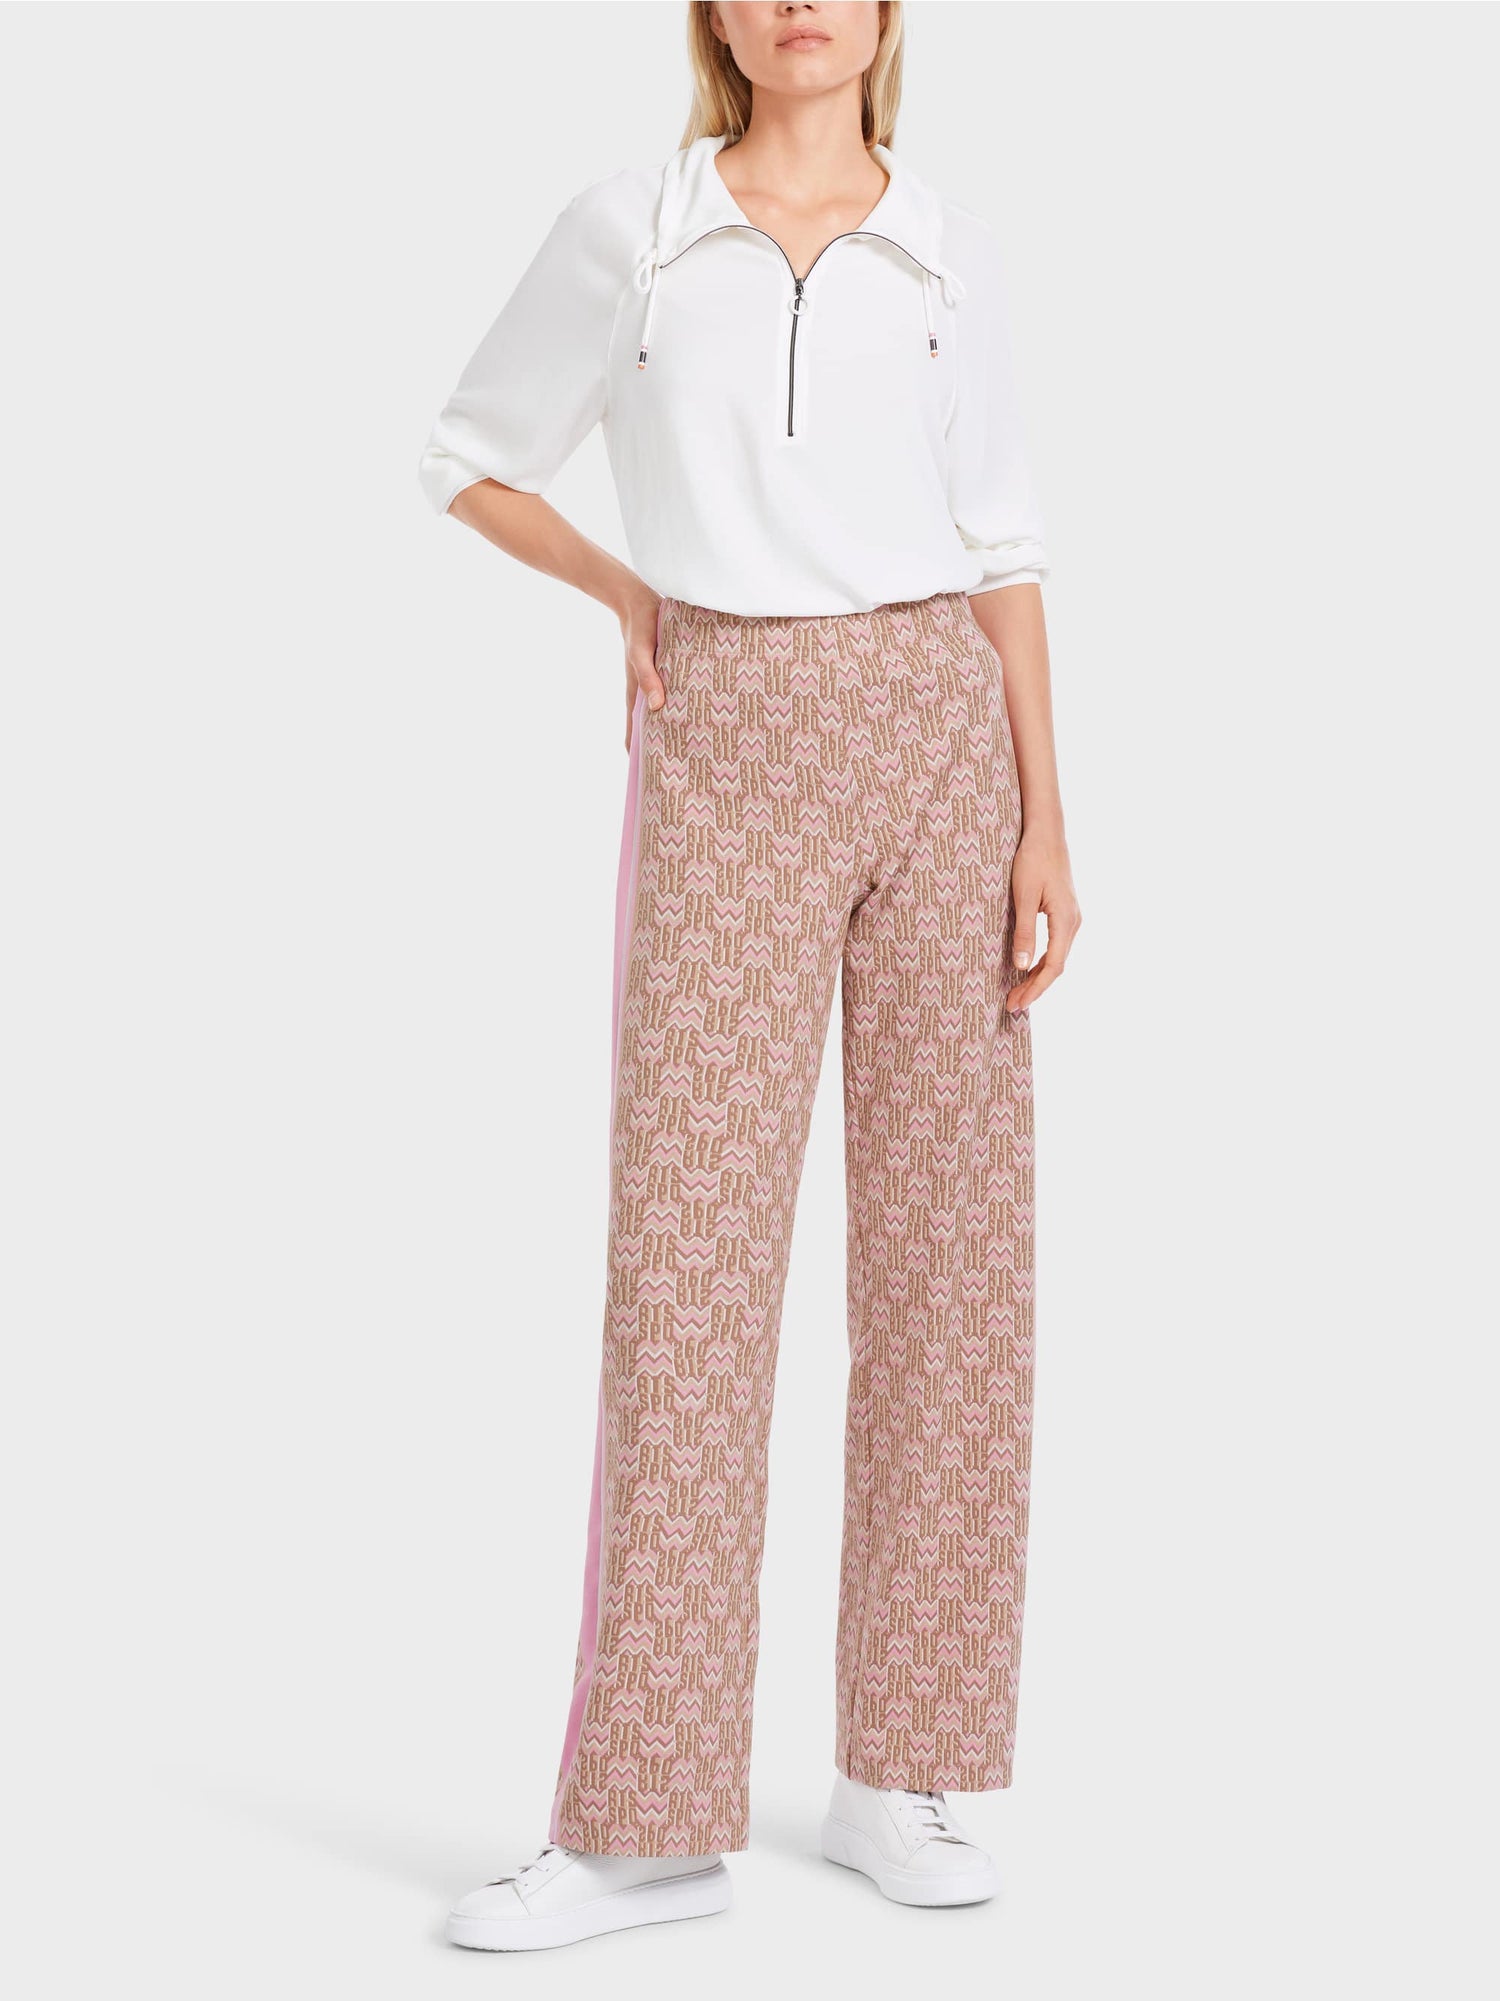 Welby Pants With Leo Details_VS 81.50 J43_254_04